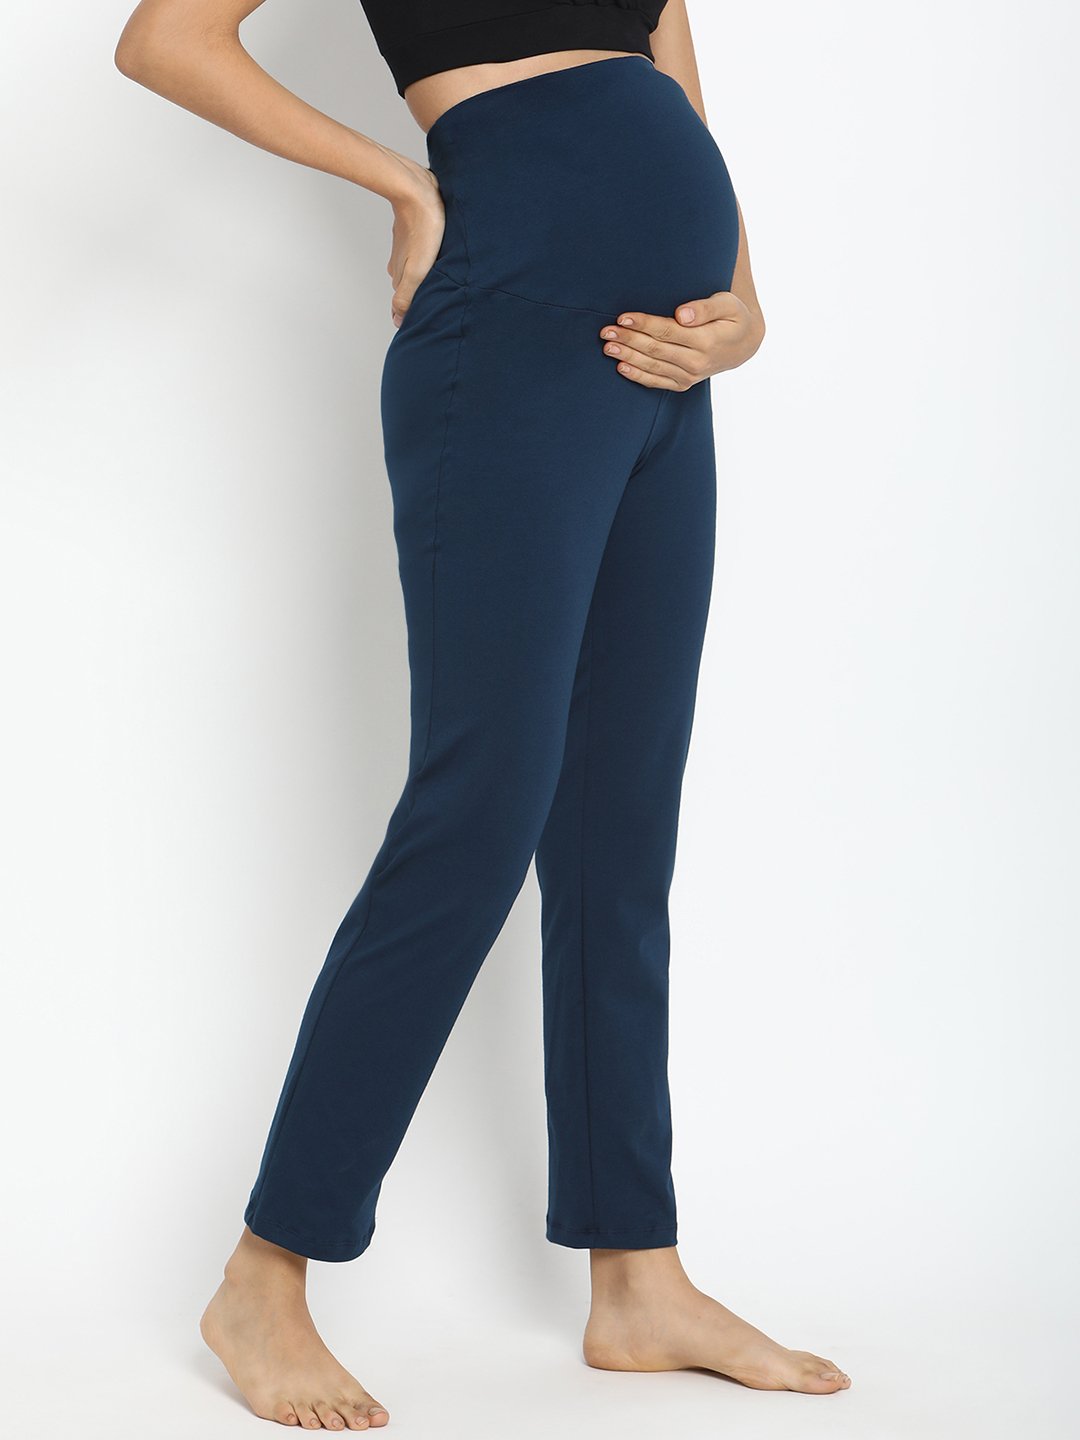 Best Places To Buy Ethical & Organic Maternity Clothes - The Eco Hub